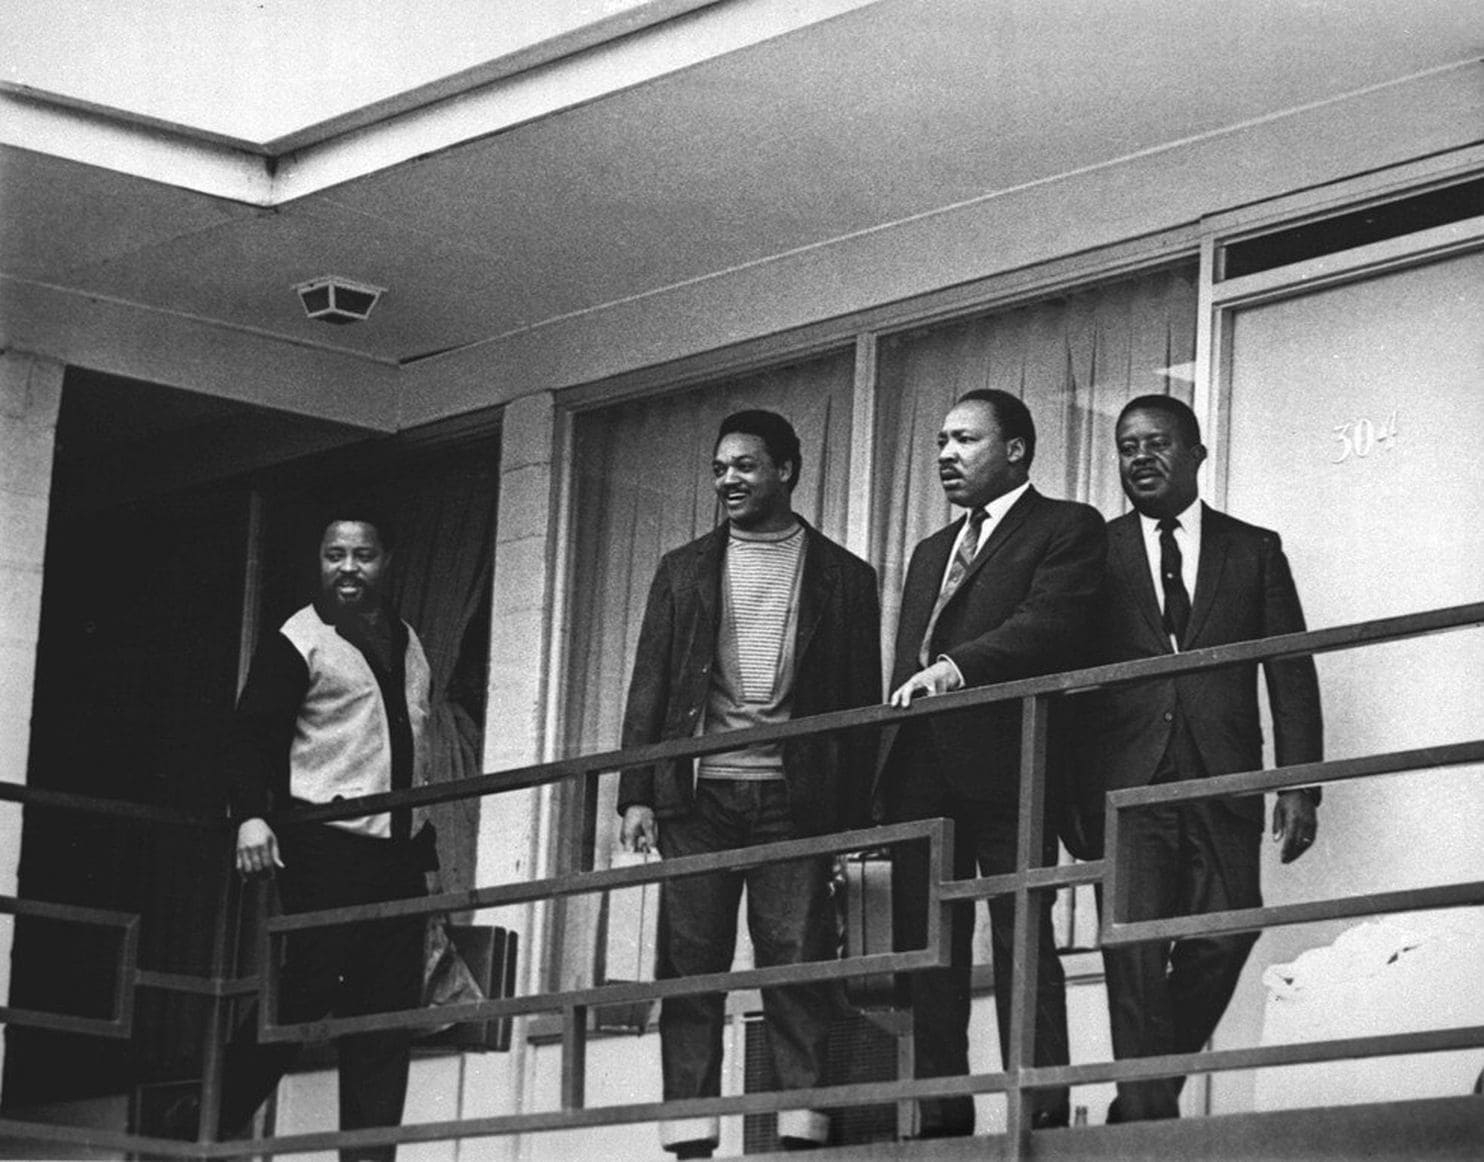 The Washington Post: Who killed Martin Luther King Jr.? His family believes James Earl Ray was framed.